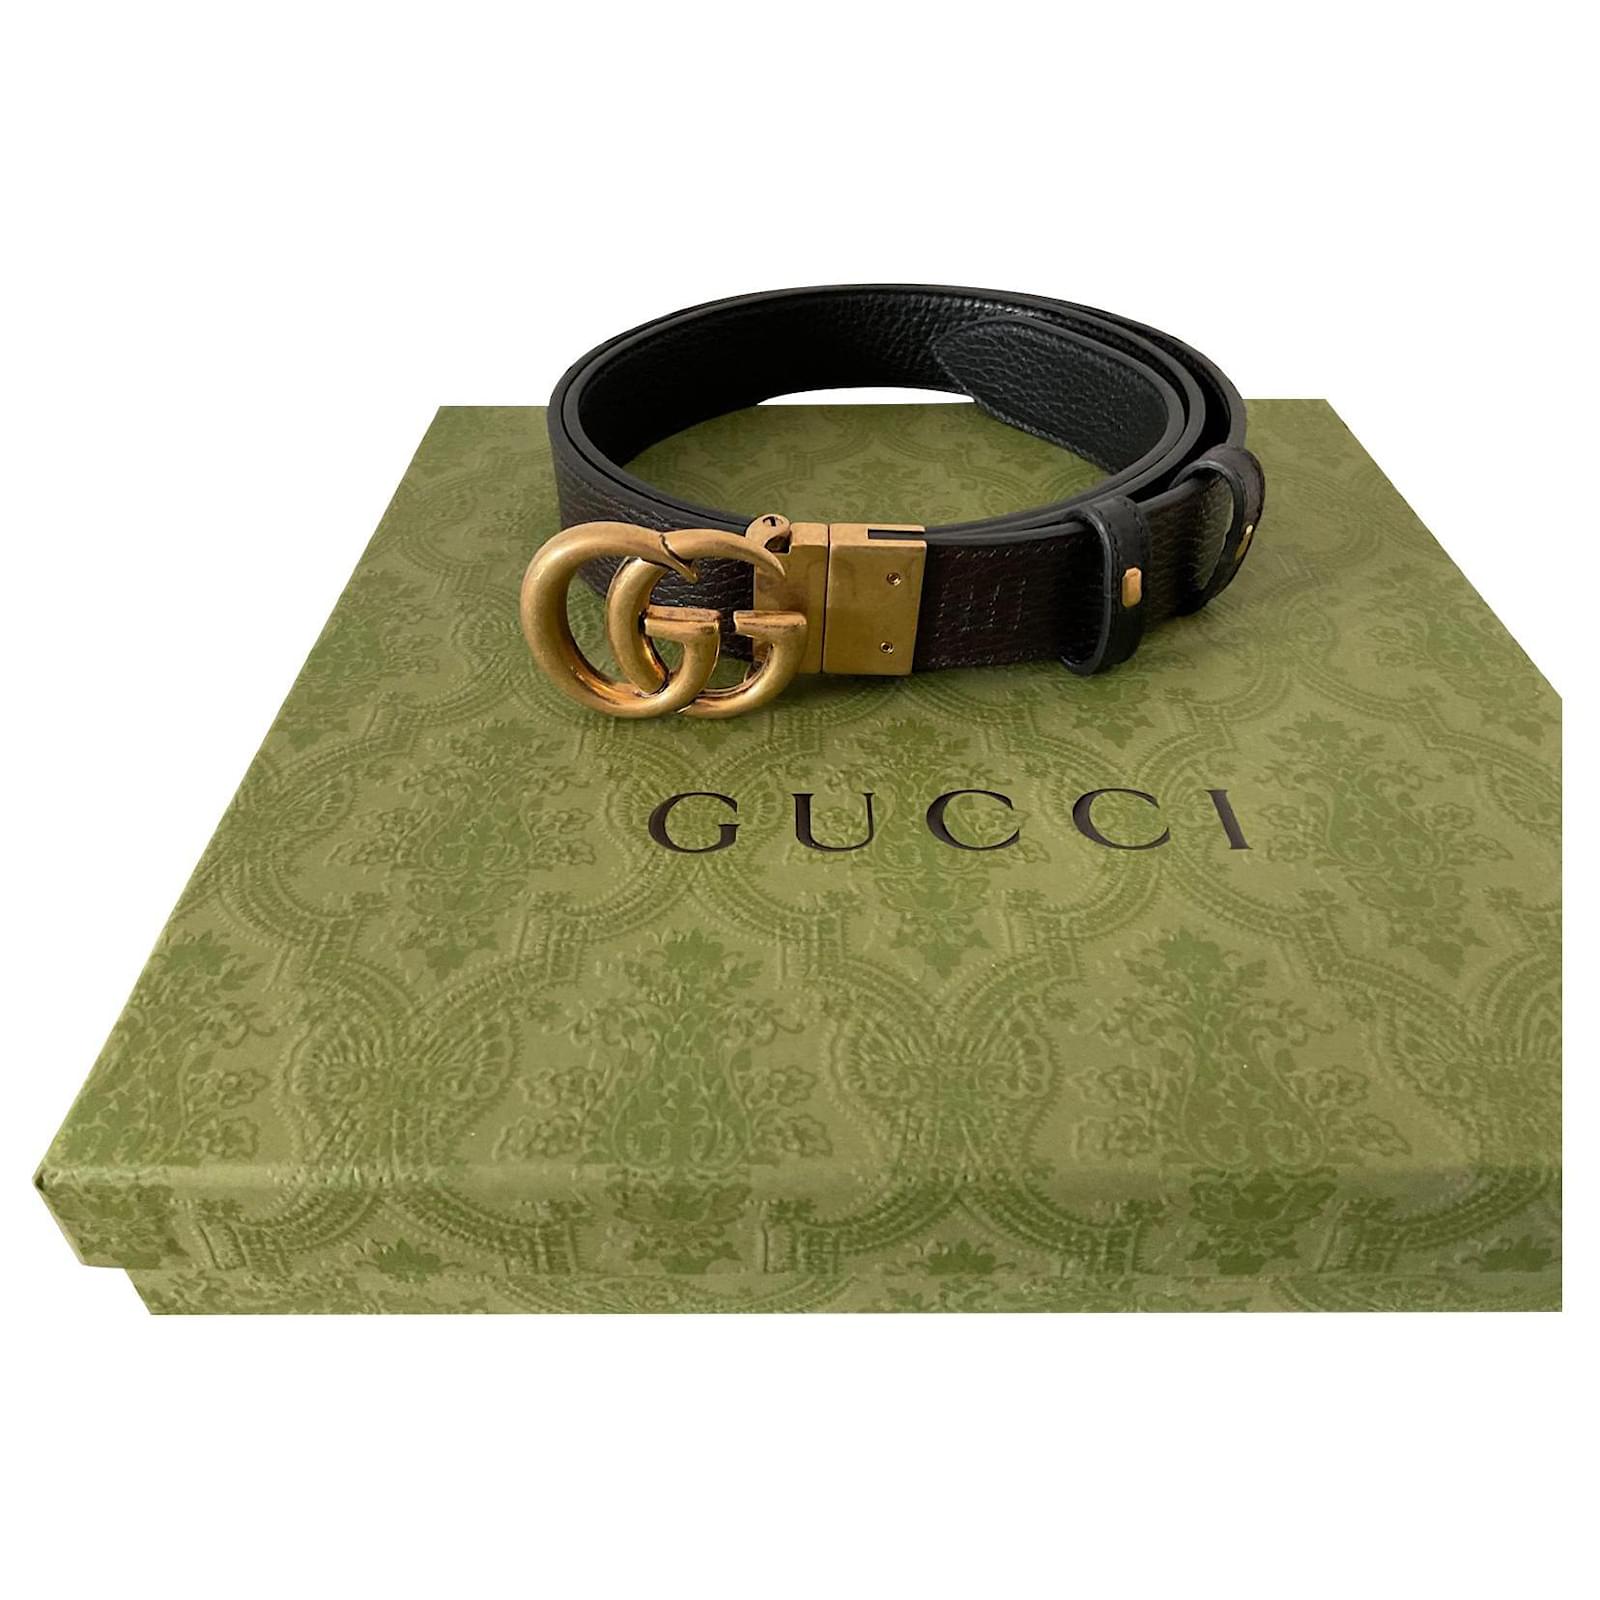 Reversible double G leather belt in black - Gucci